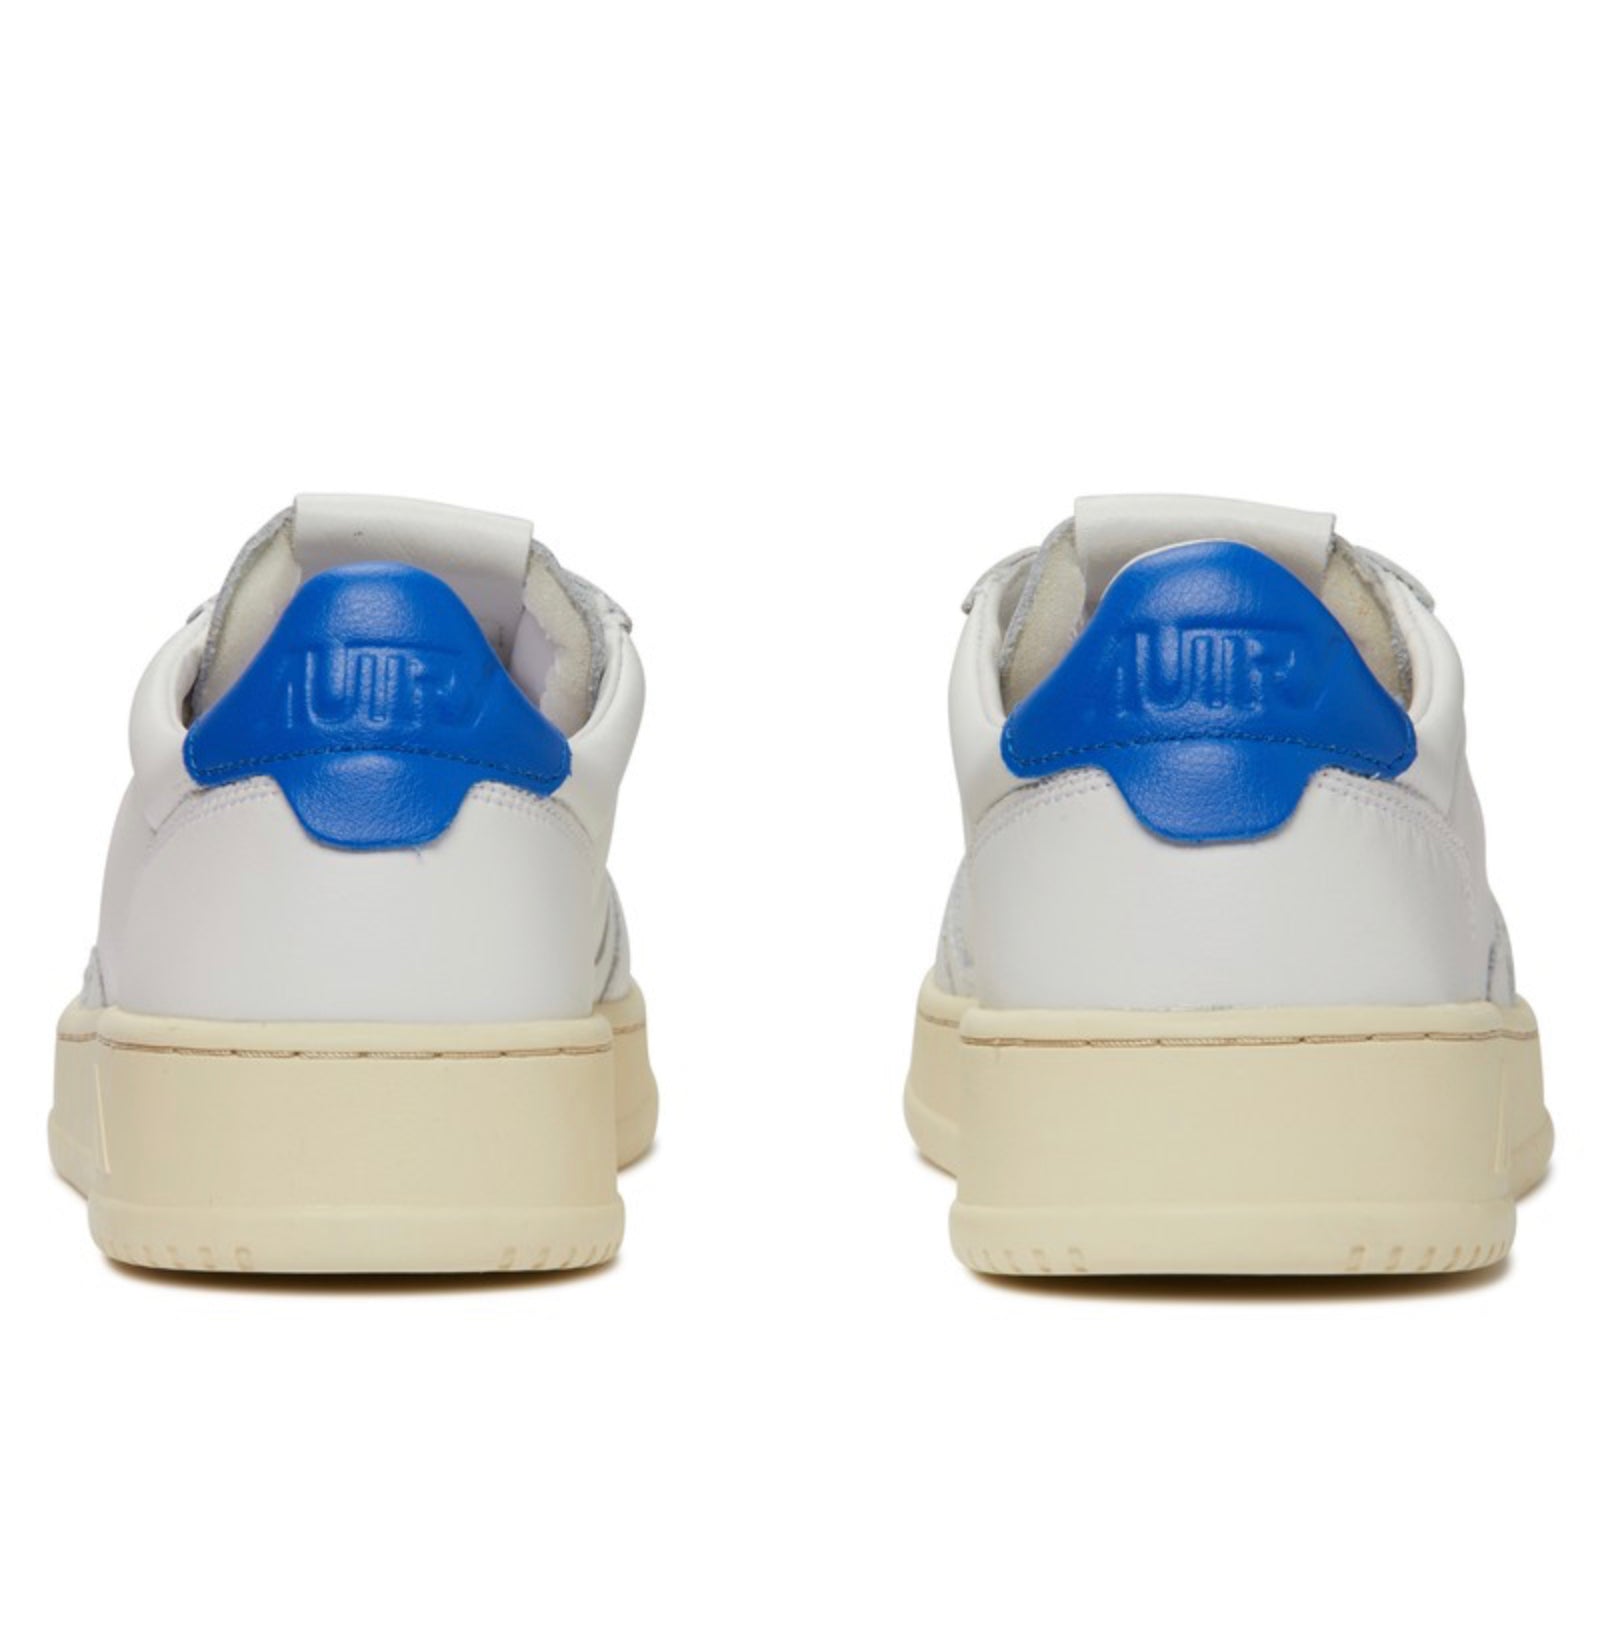 Autry Action Shoes Low Man Leather - White & P Blue (Excluded from discount) , Trainers, Autry, Working Title